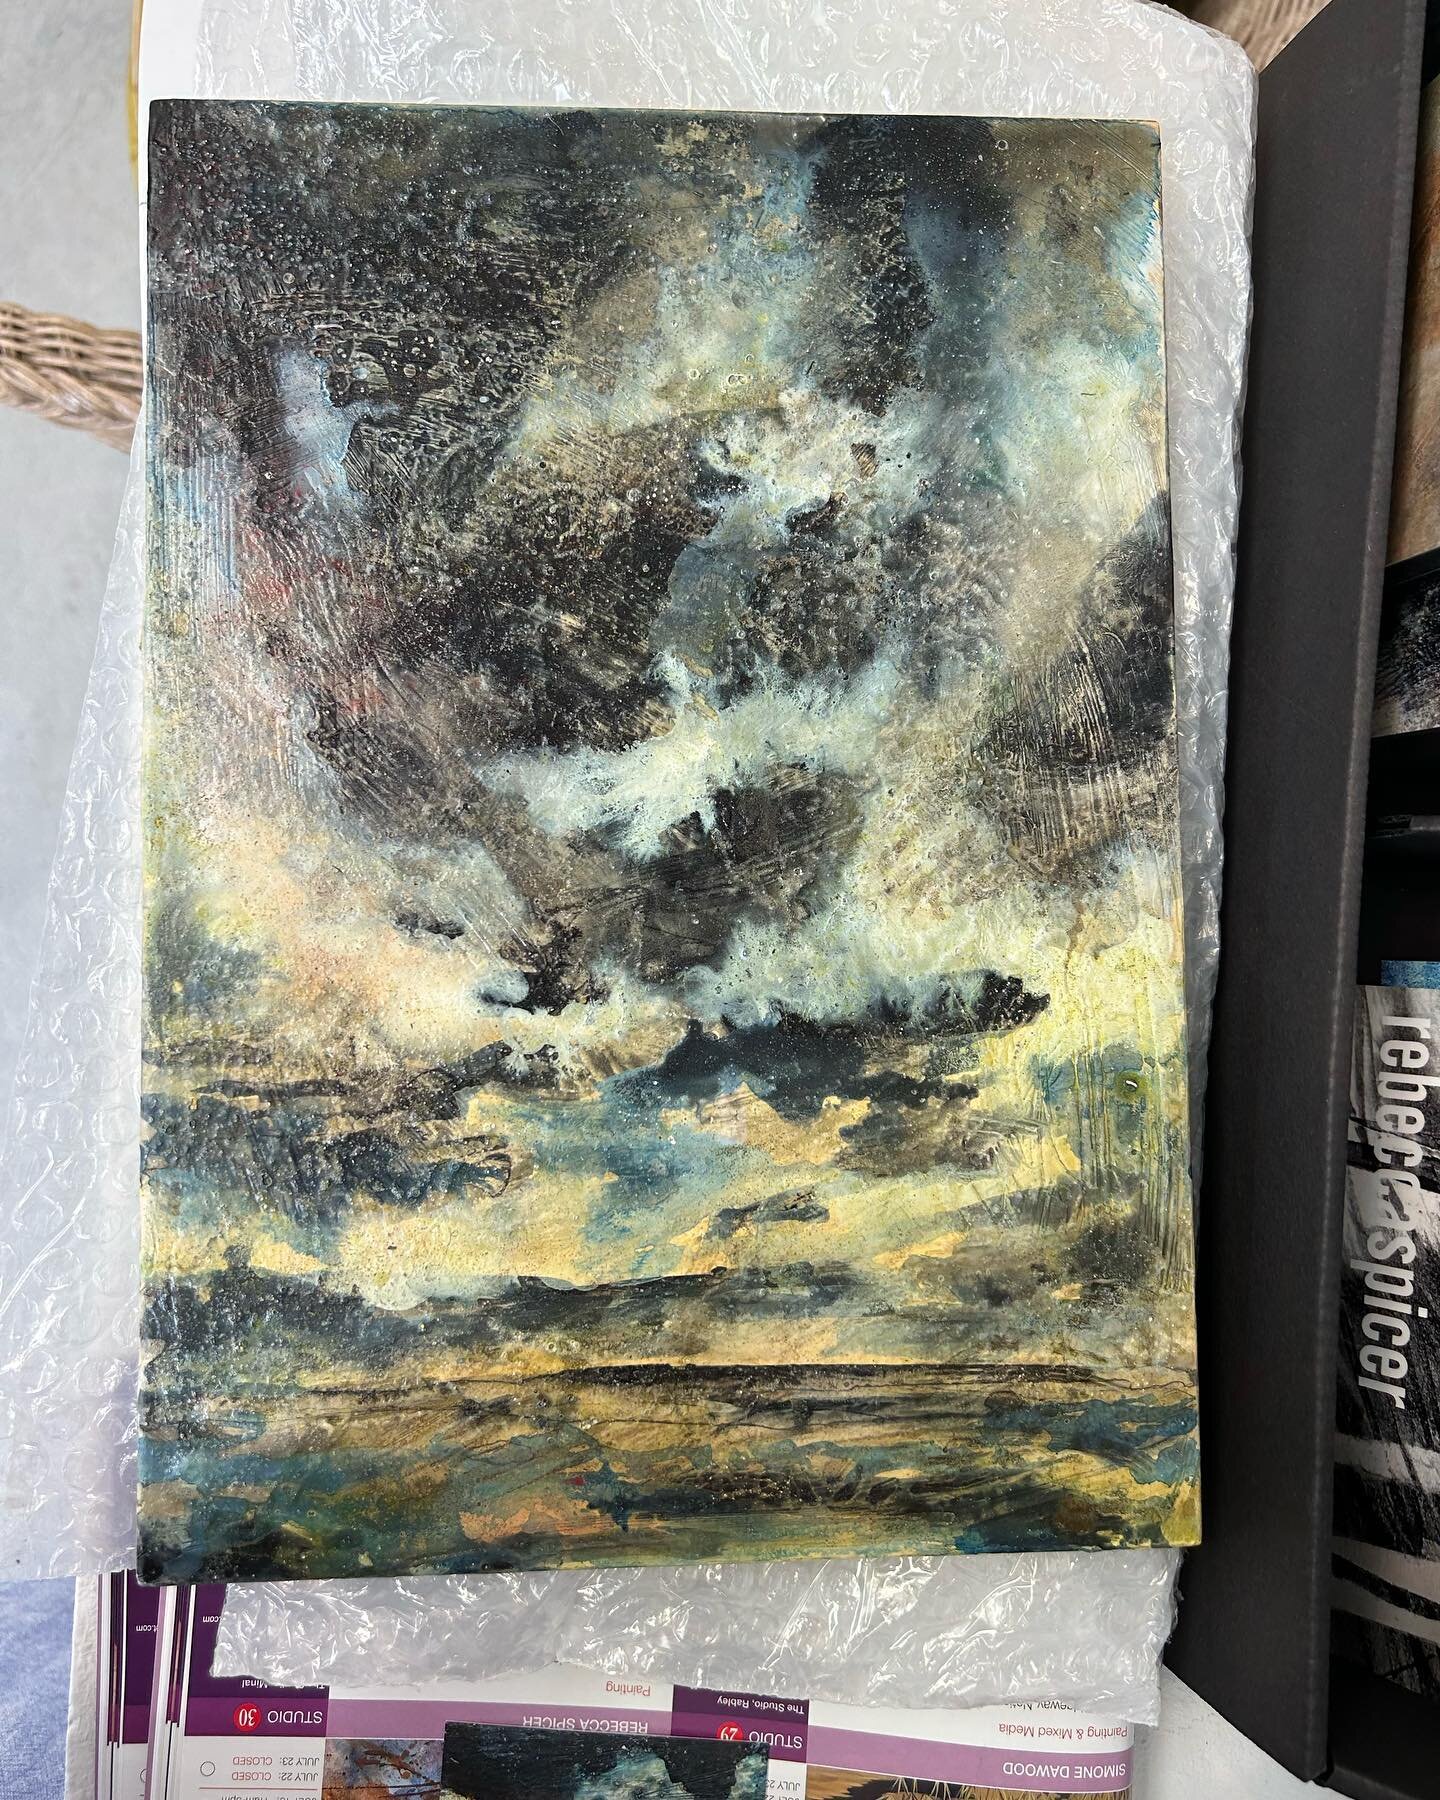 Another painting off to a new home &lsquo;The thin wind blows right through III&rsquo; all ready to go!
Studio 30 @marlboroughopenstudios #newhome #newpainting #buyart #buyartfromartists #allreadytogo #britishart #britishpainter